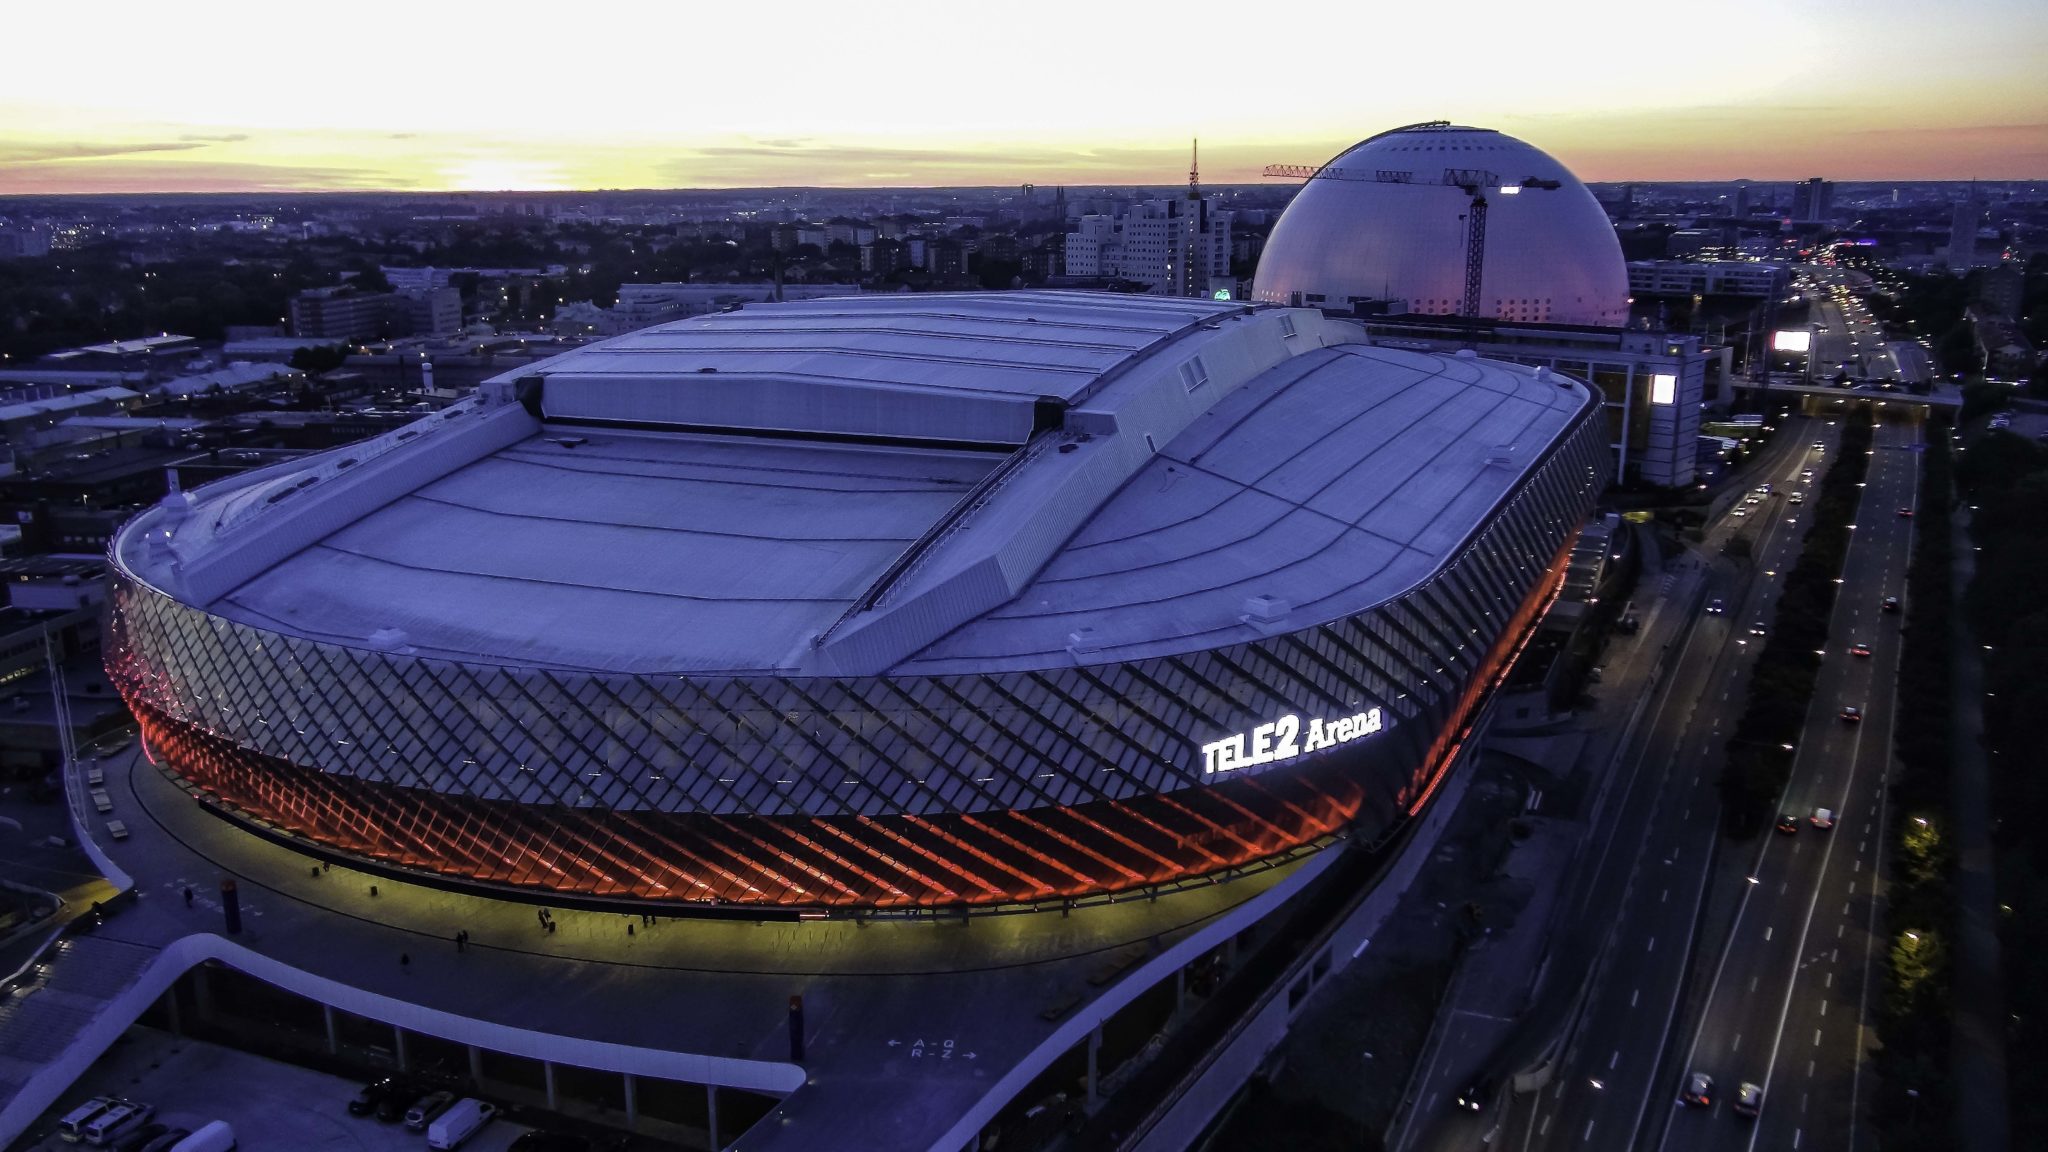 Eurovision 2016: Friends Arena & Tele2 Arena pull out of bid